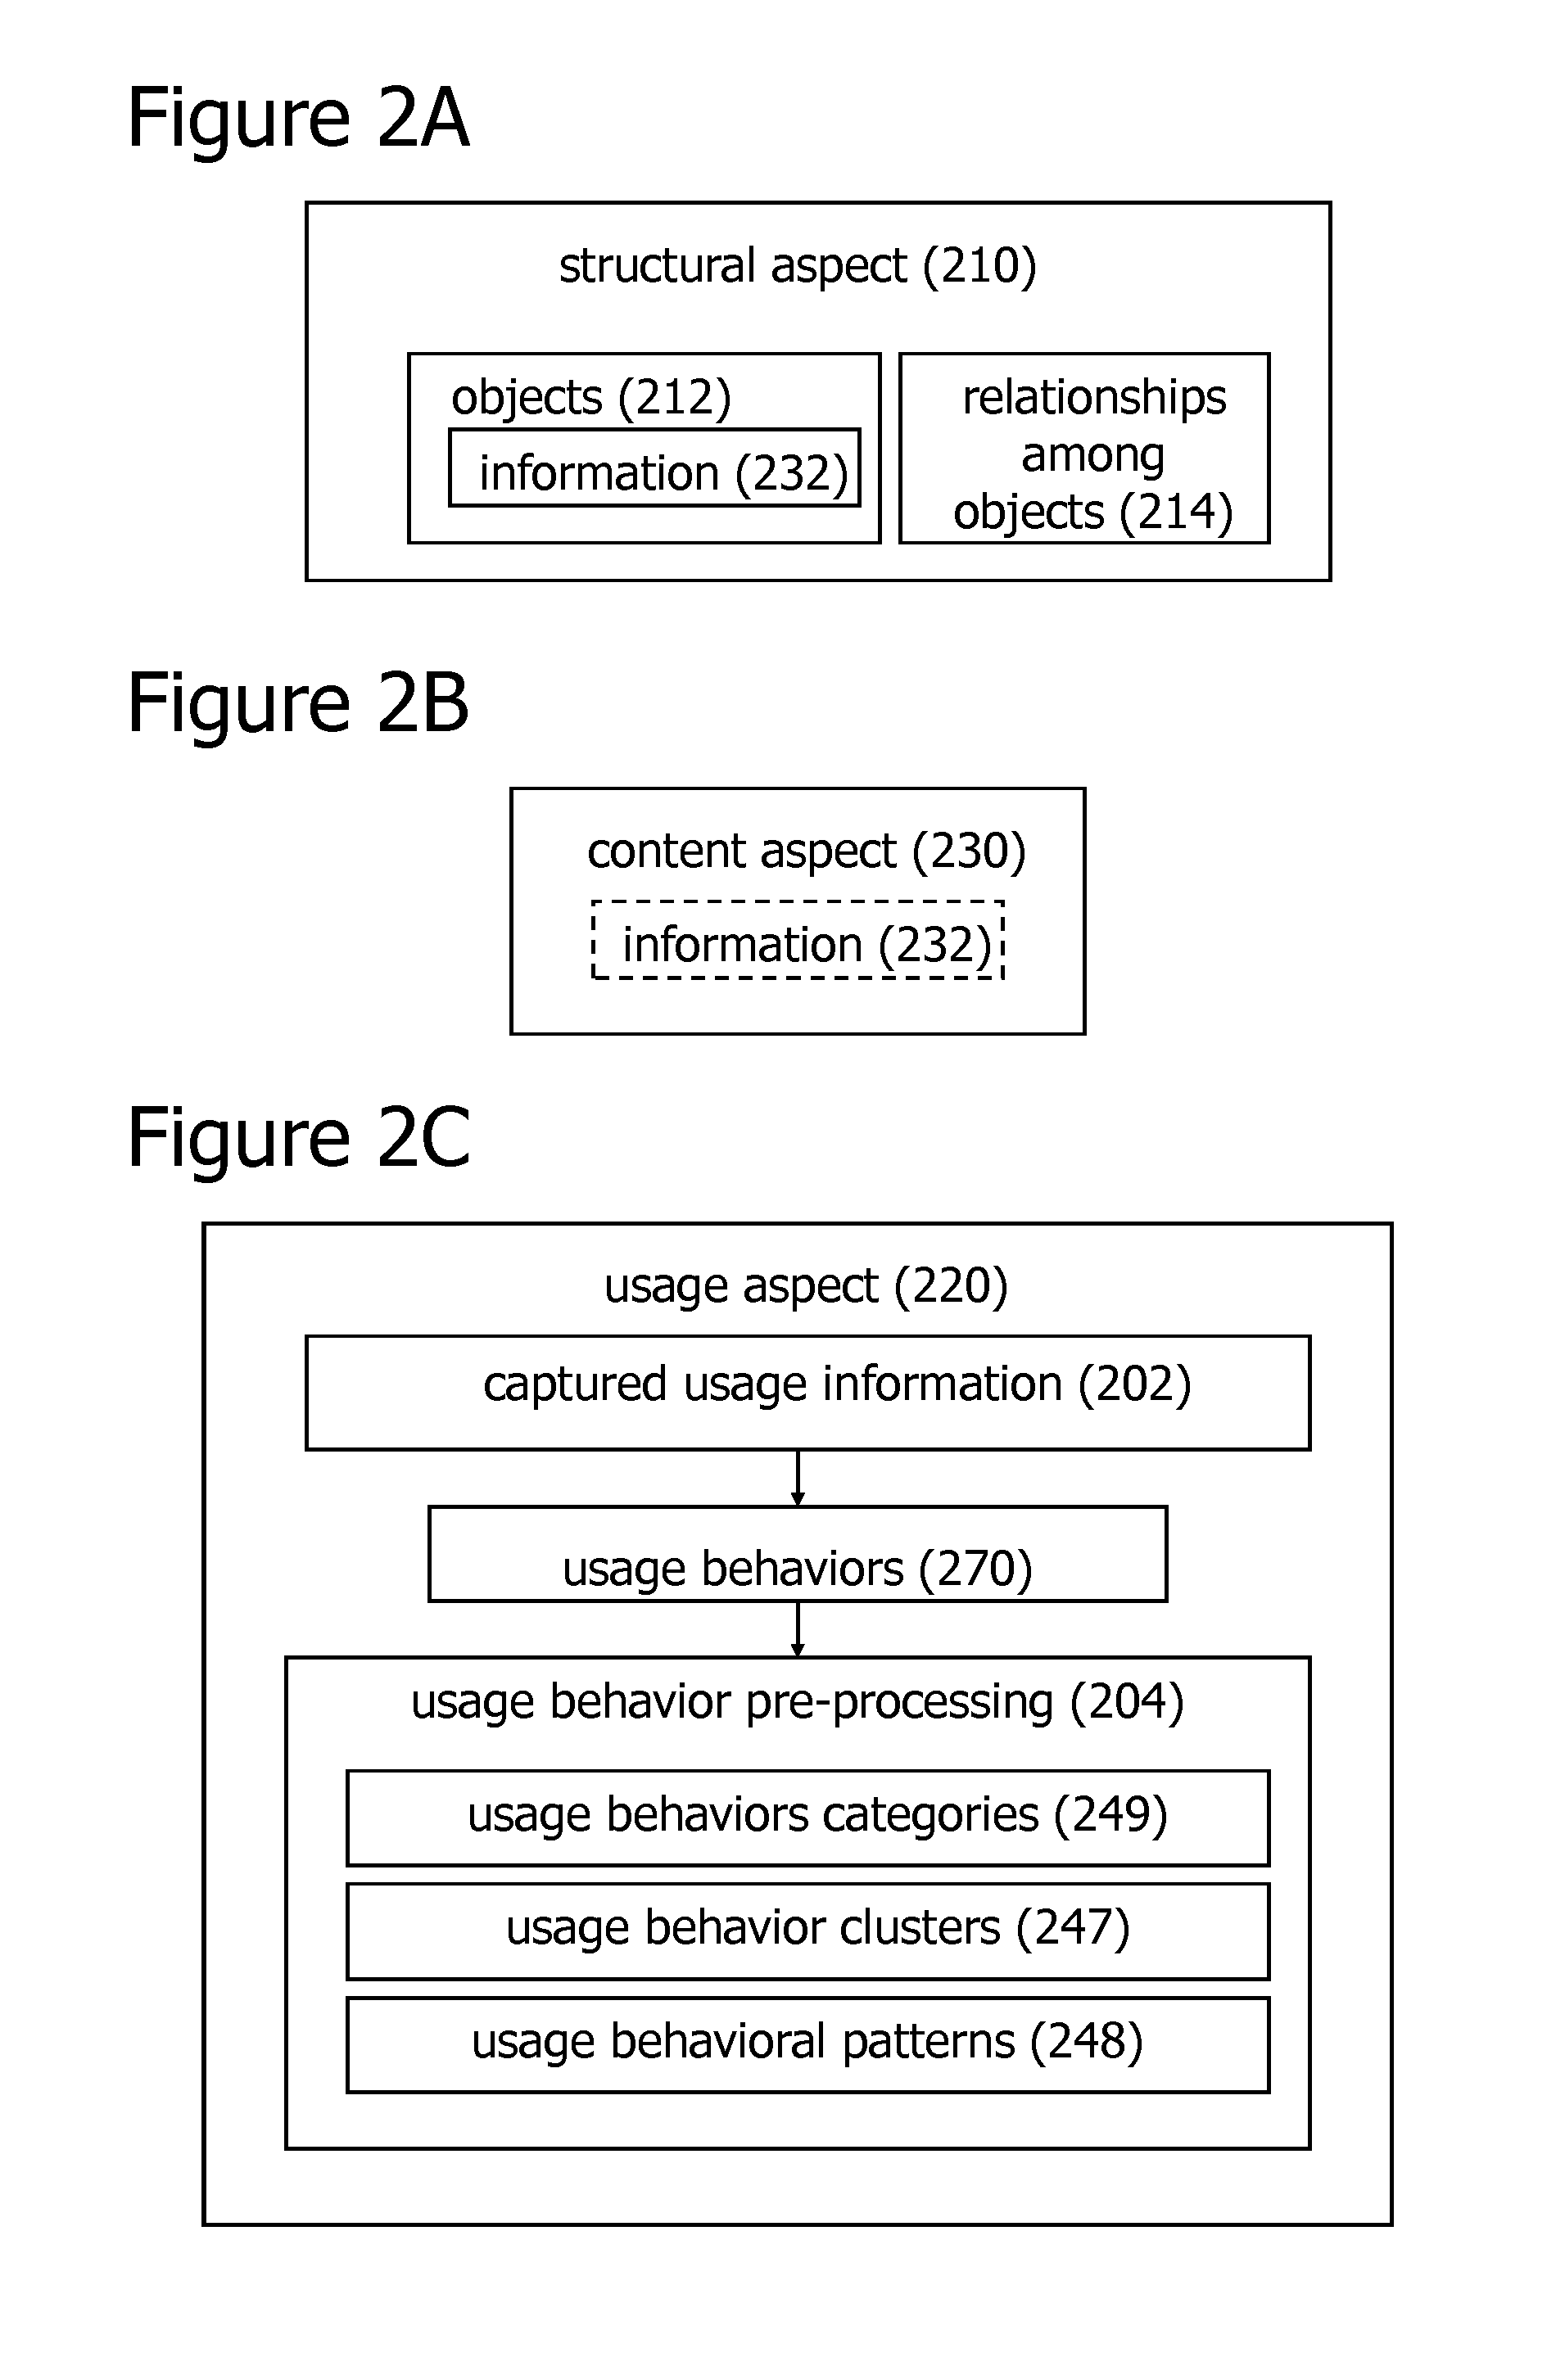 Integrated interest and expertise-based discovery system and method